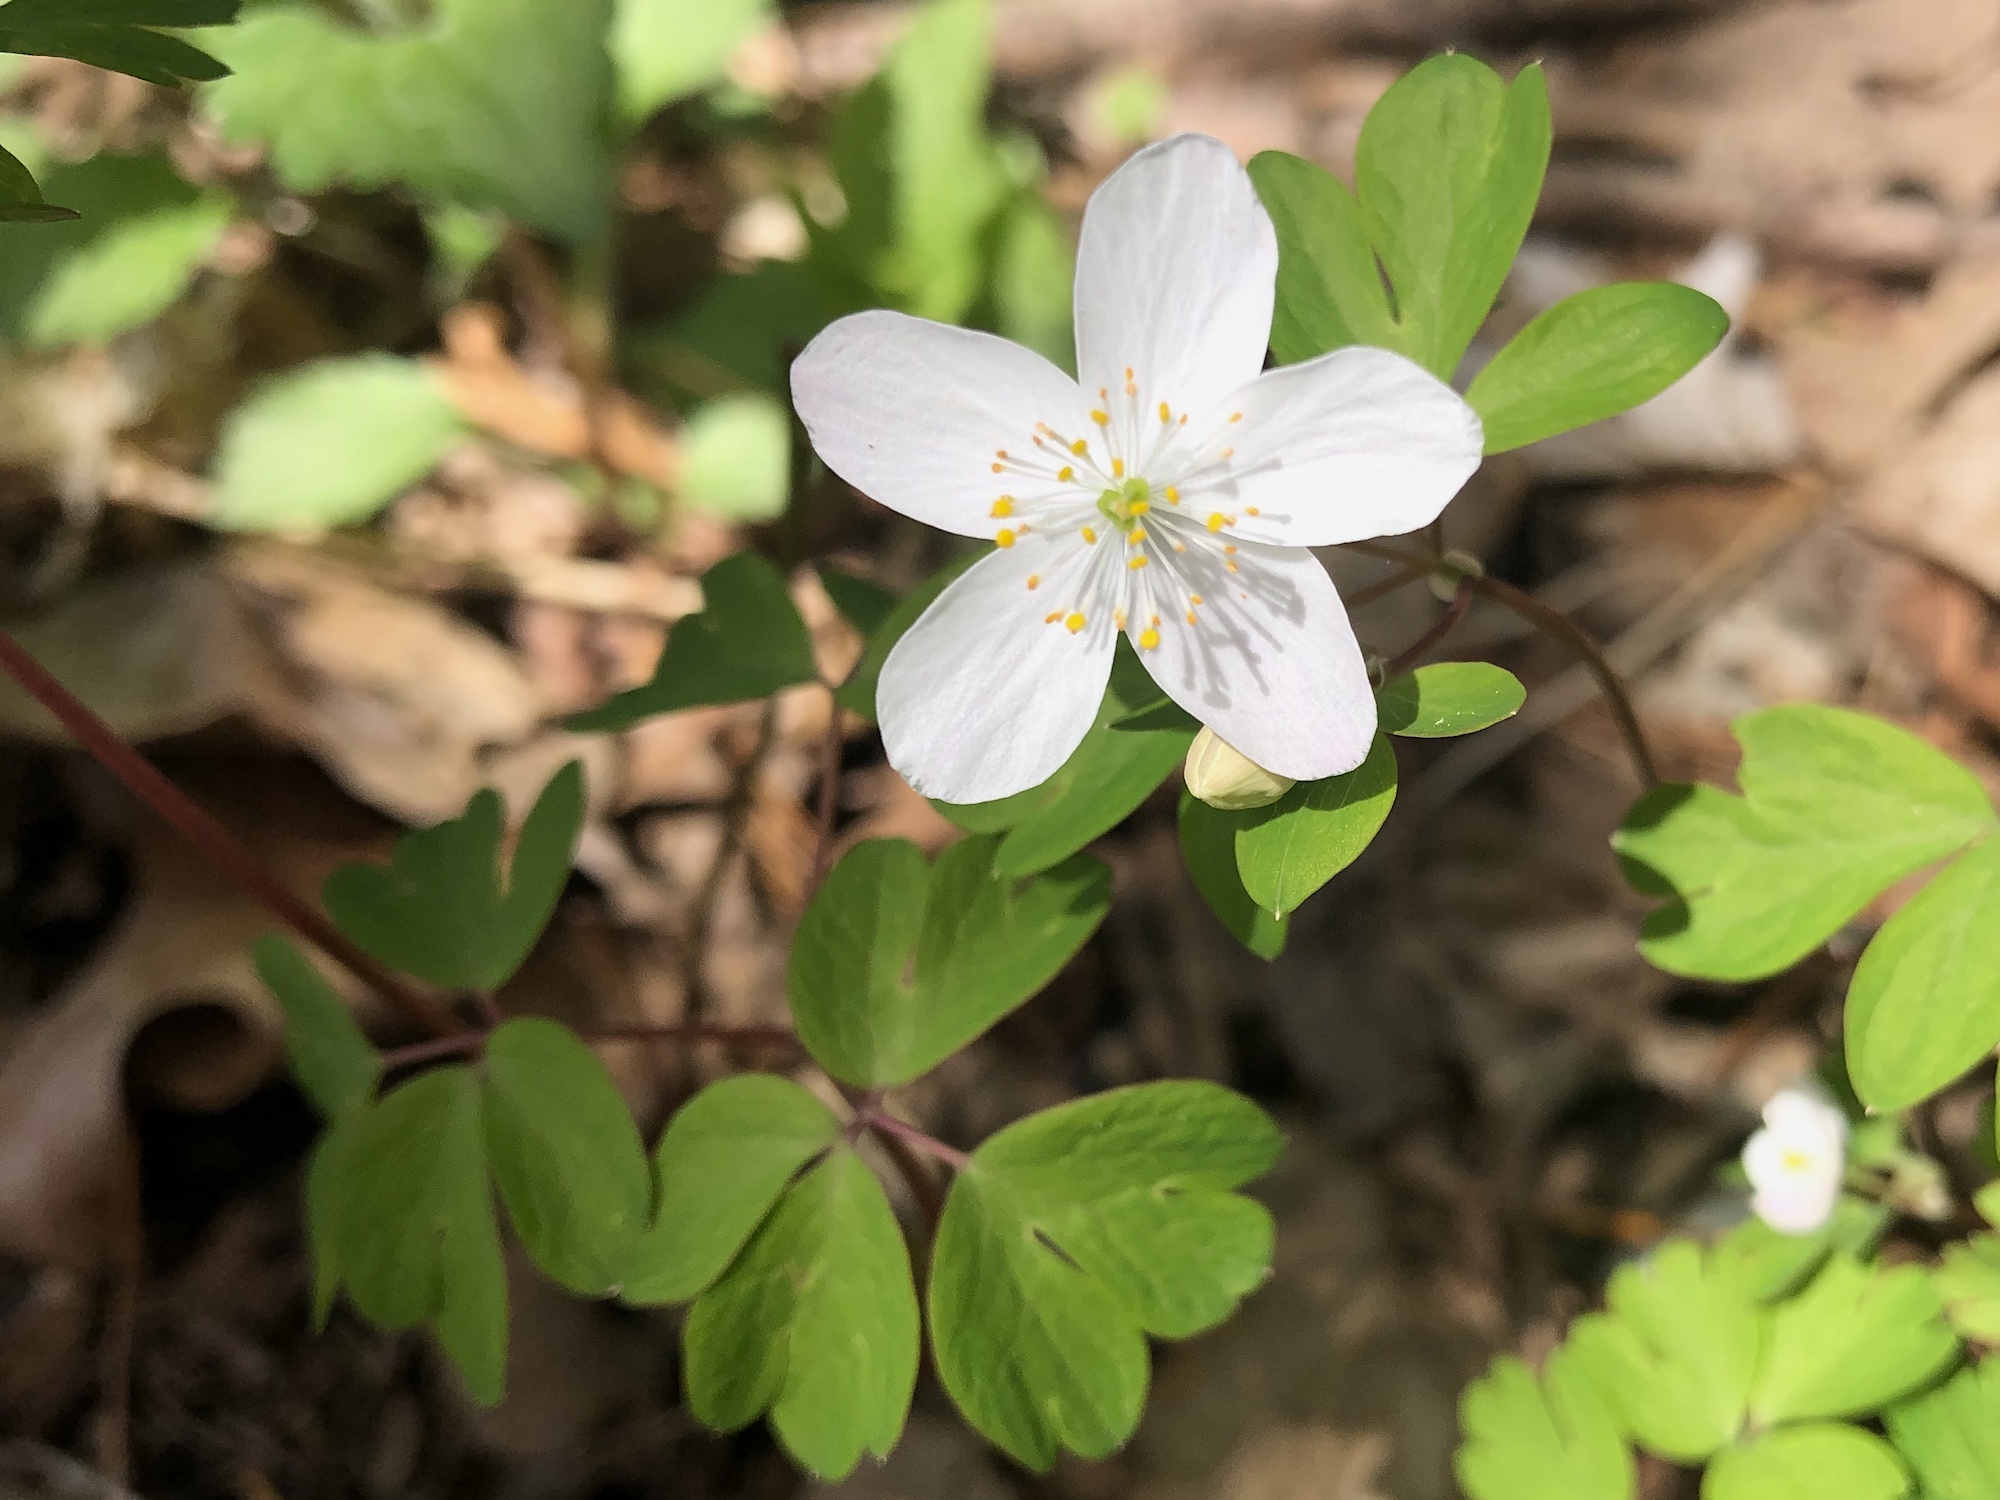 False Rue Anemone in the Maple-Basswood Forest of the University of Wisconsin Arboretum in Madison, Wisconsin on May 6, 2020.